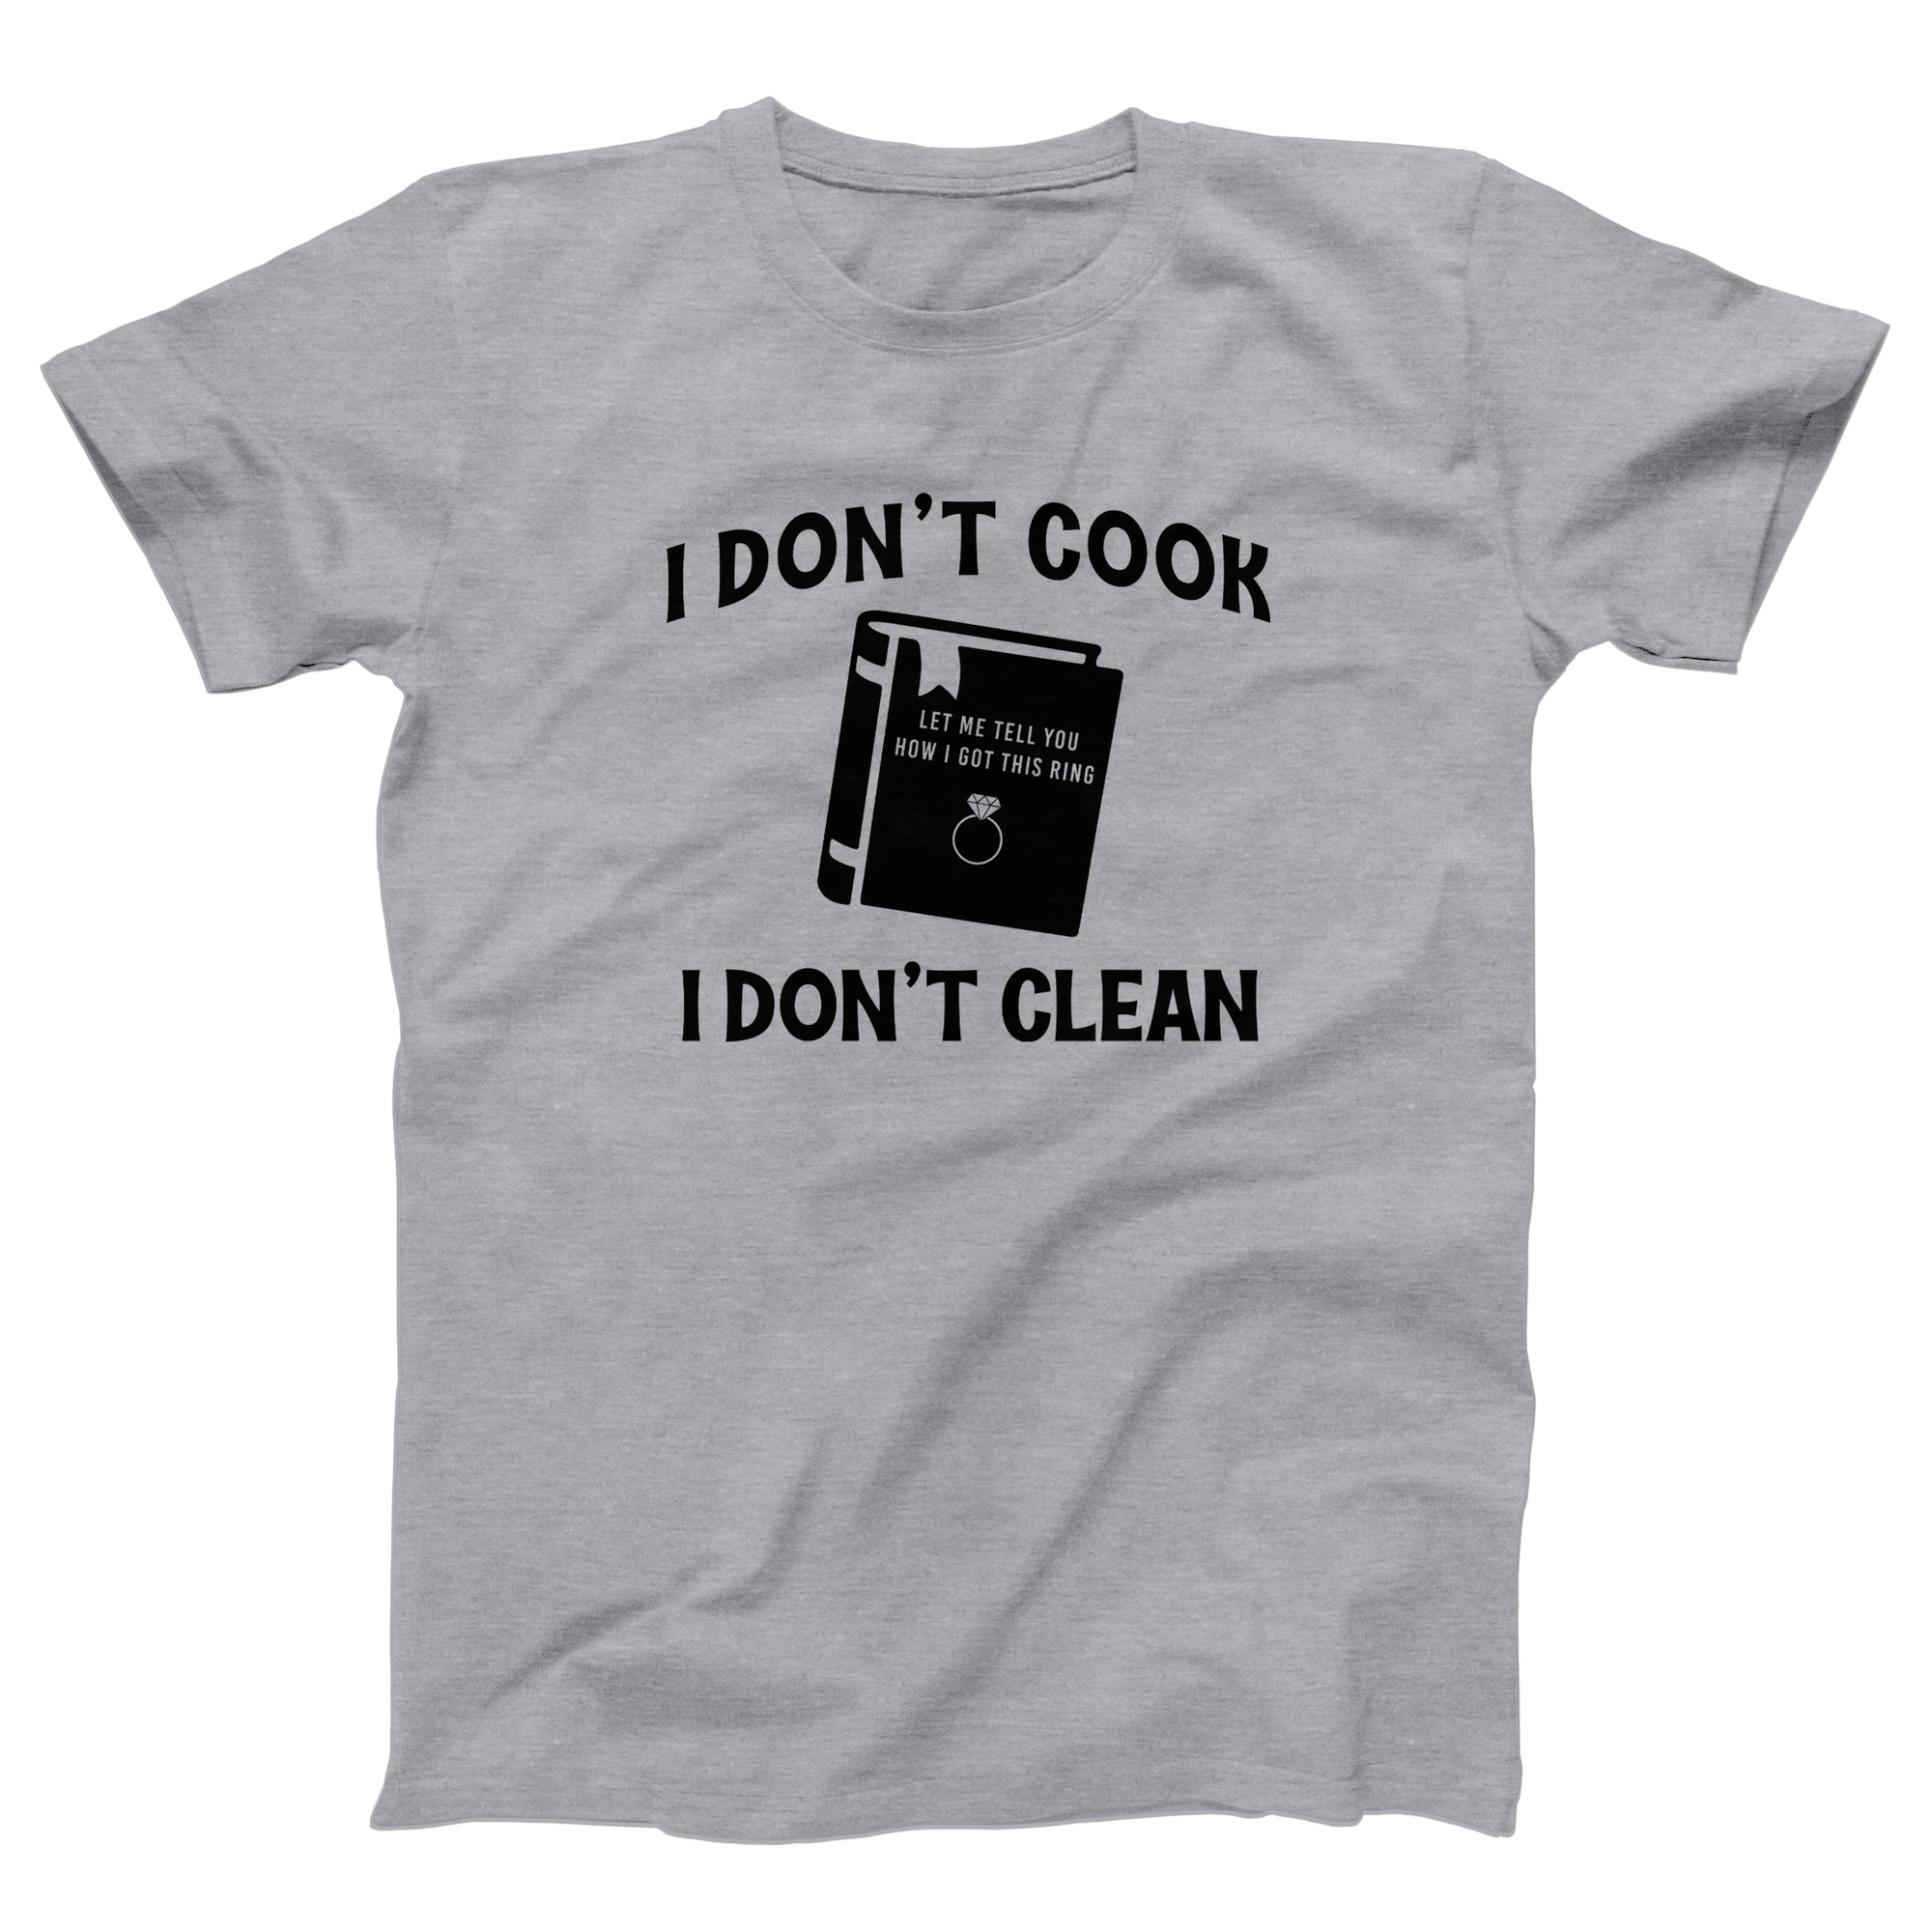 I Don't Cook, I Don't Clean Adult Unisex T-Shirt - anishphilip